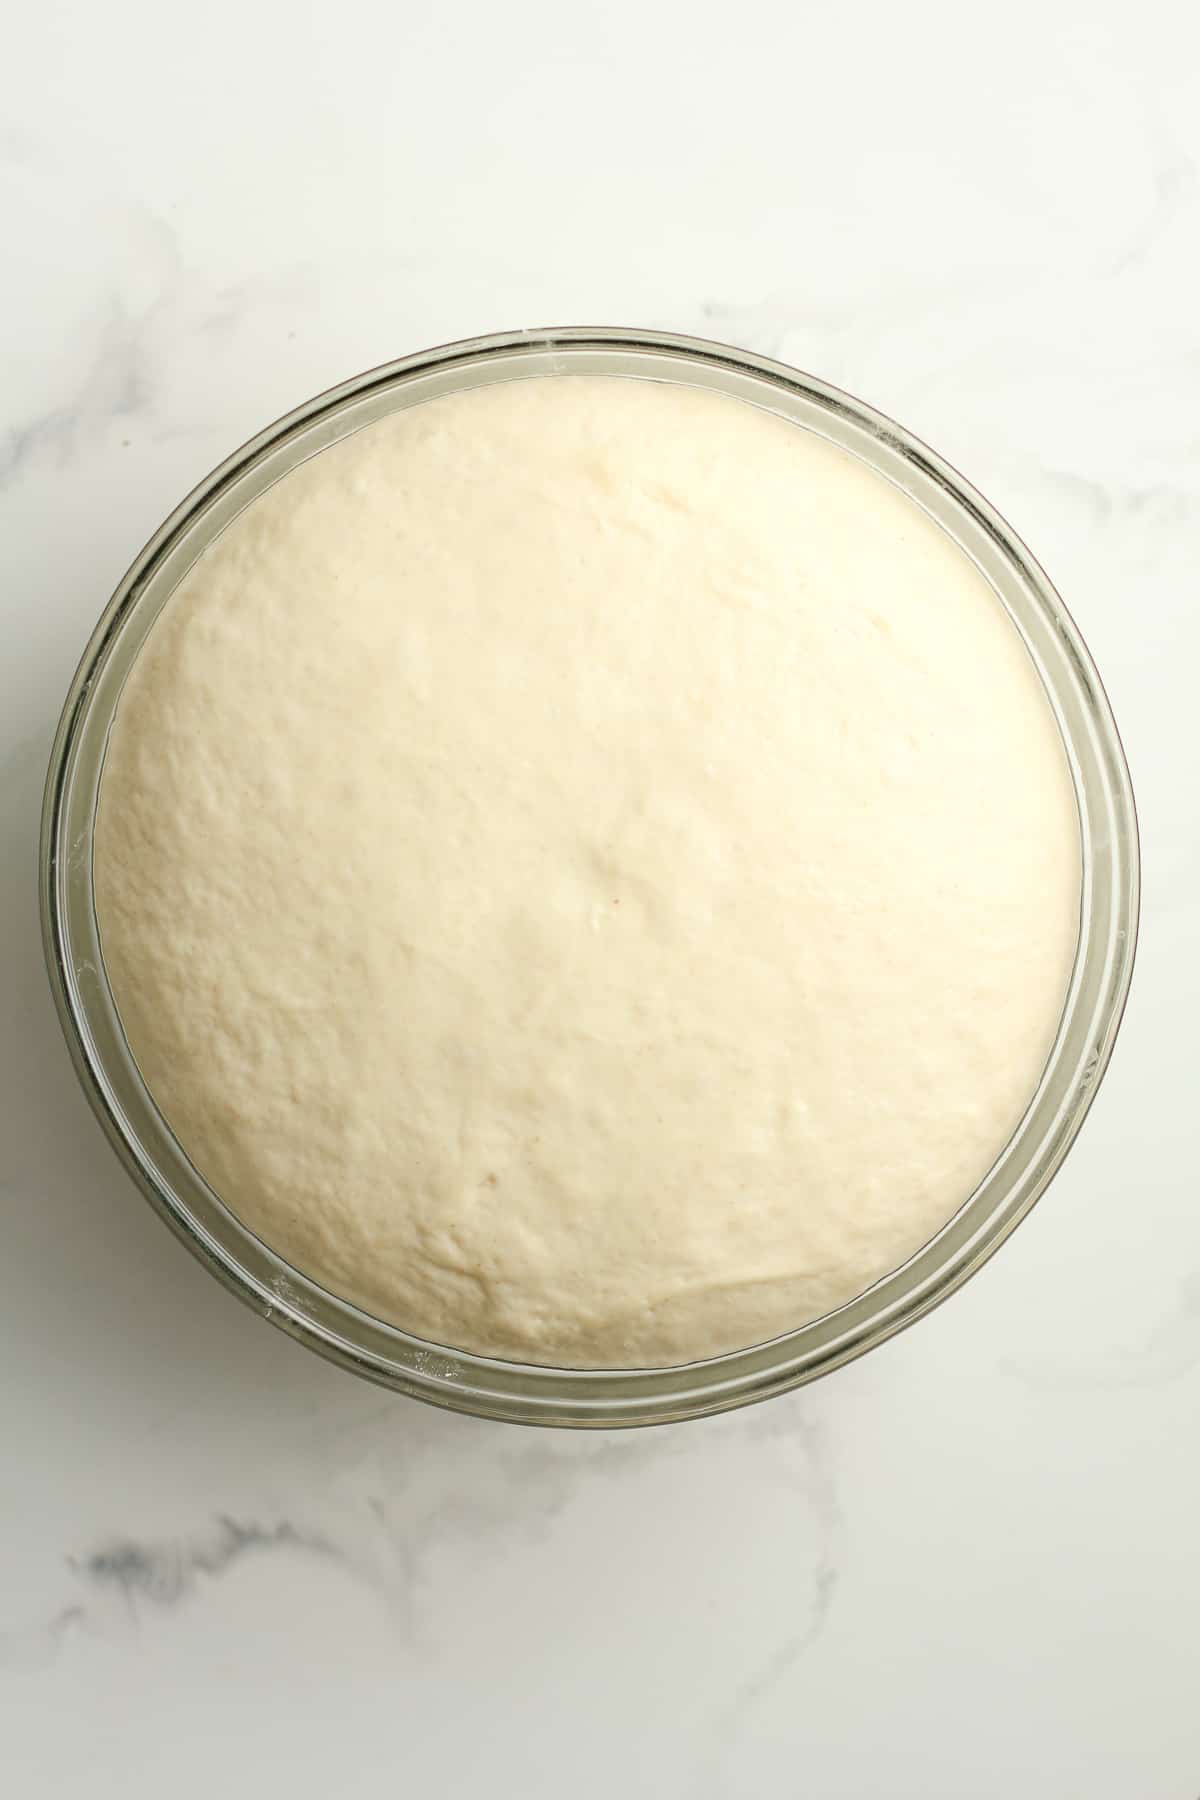 A bowl of the dough after rising.